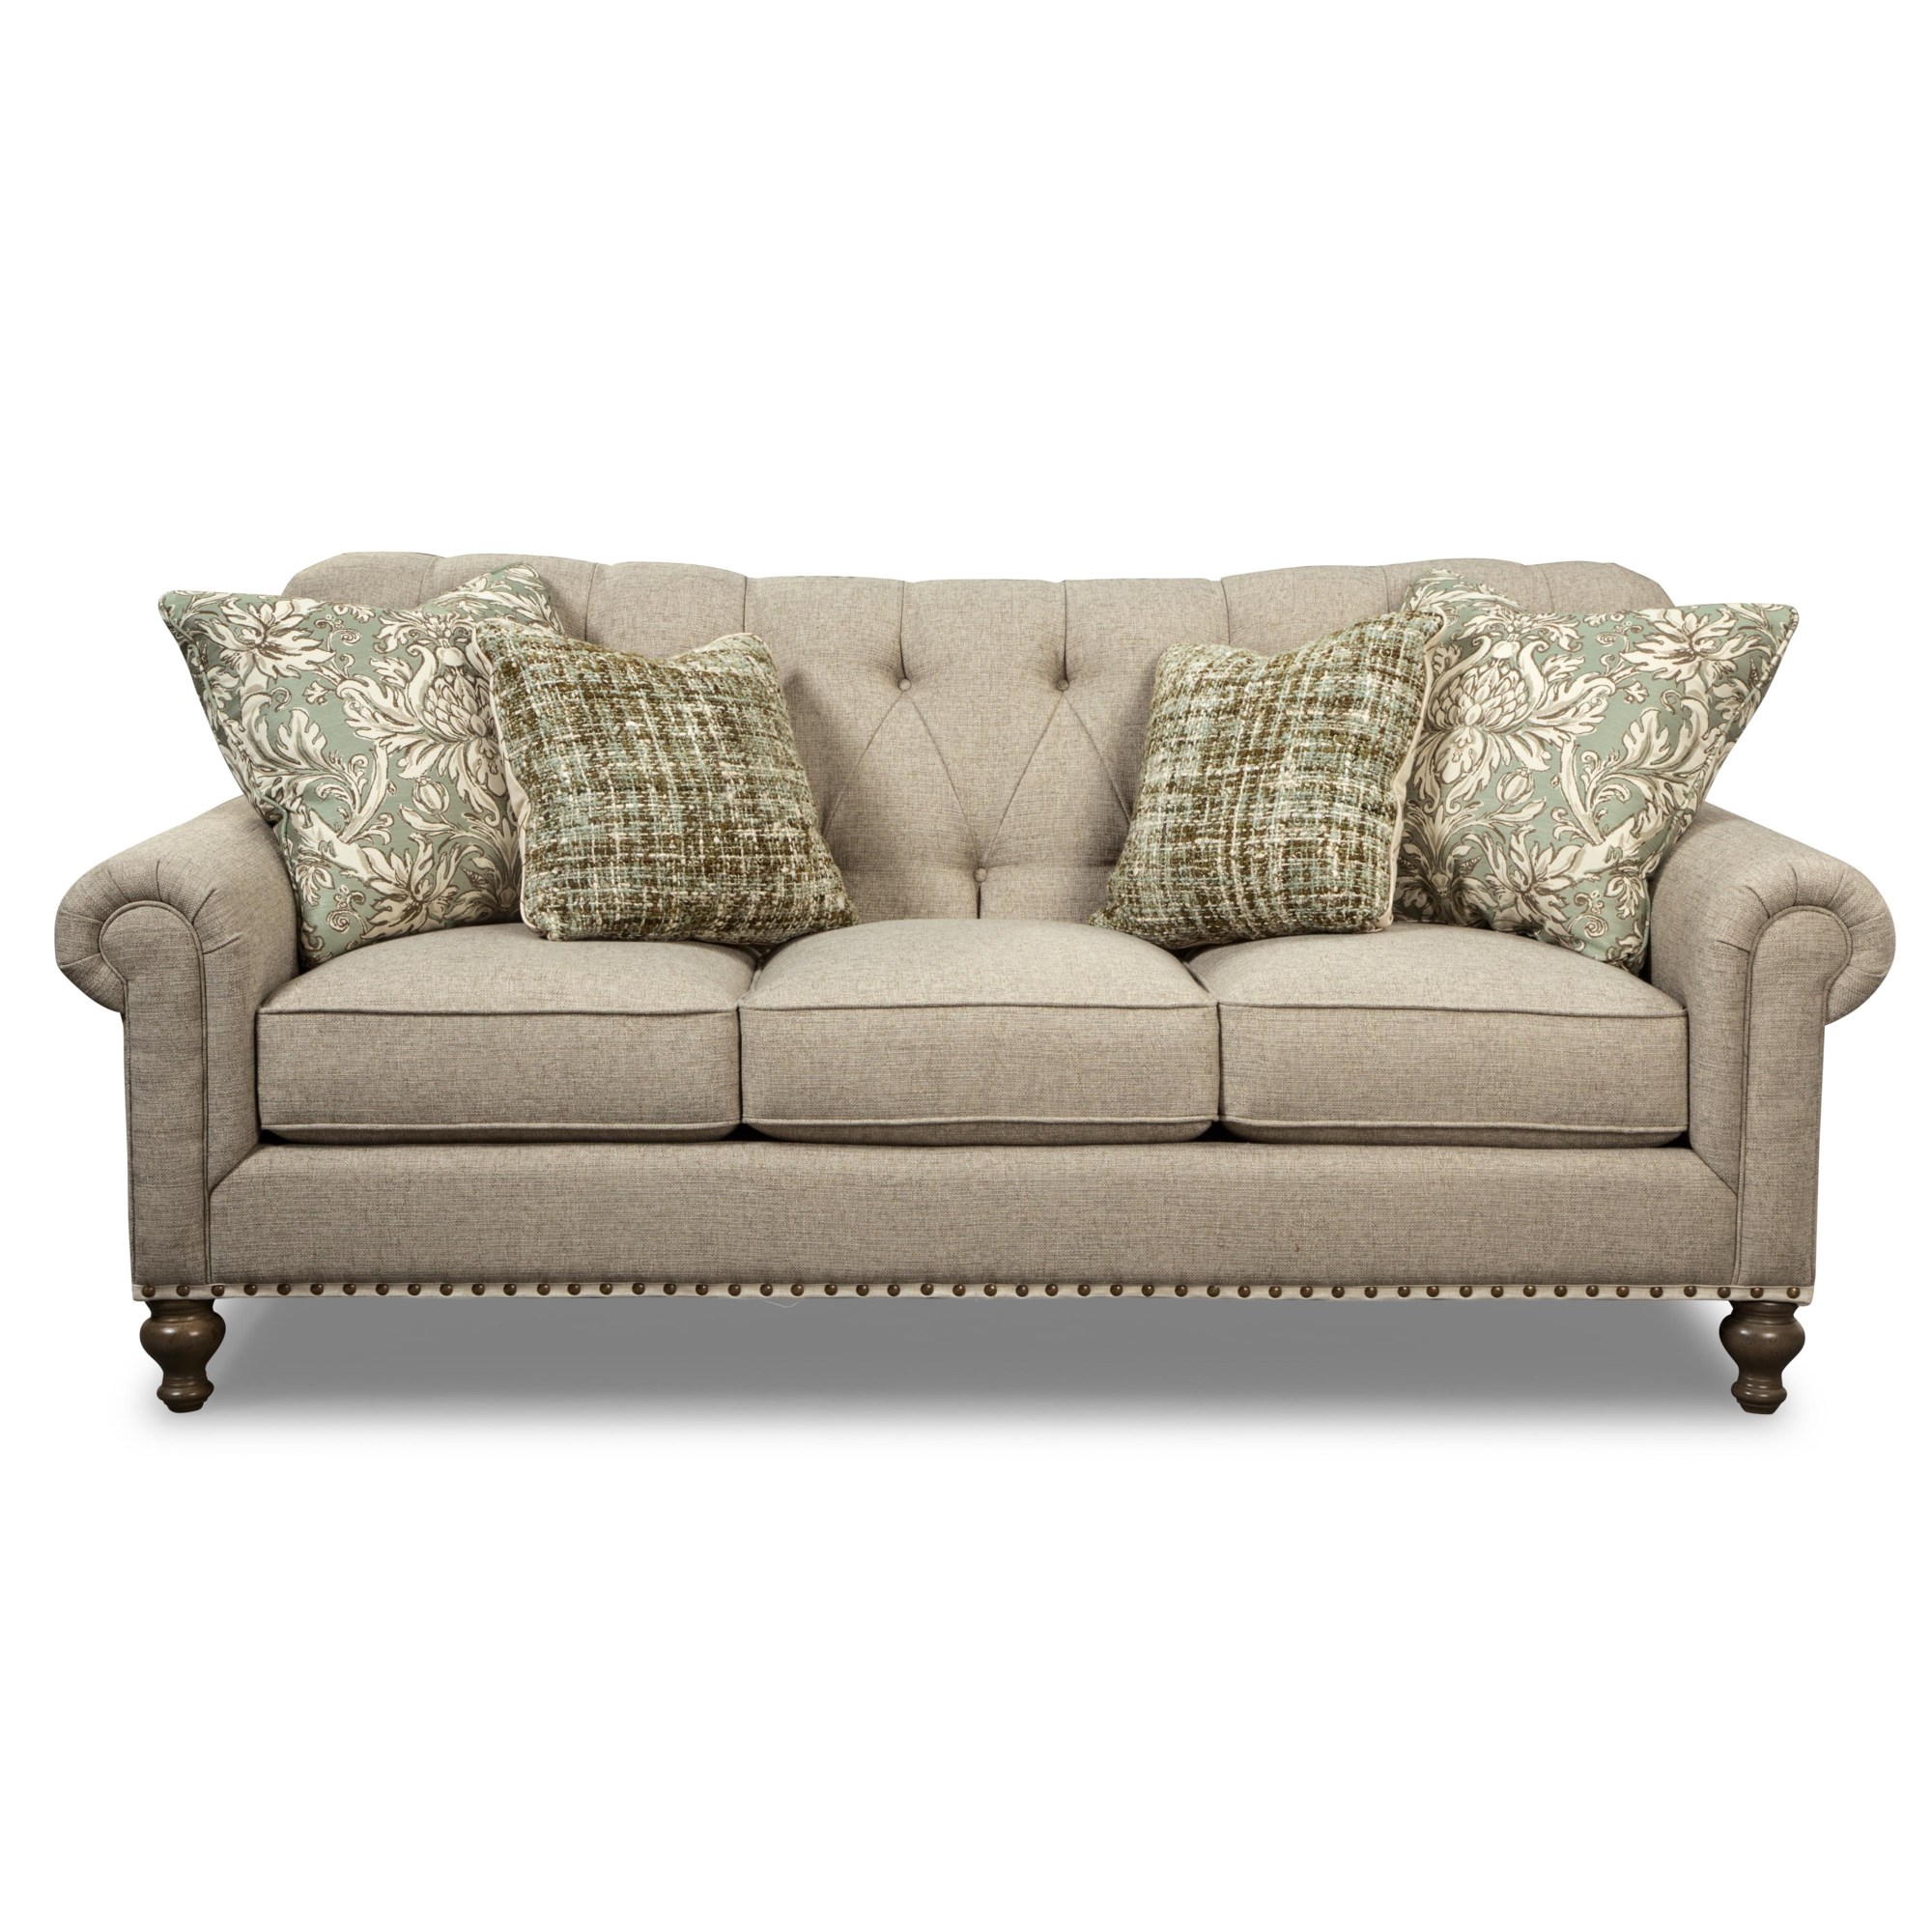 Tufted Stationary Lagniappe Deen Nailheads Sofa Home Camelback Uph P754150BD Sofas by Store PD754100 - Traditional with | Paula Craftmaster |